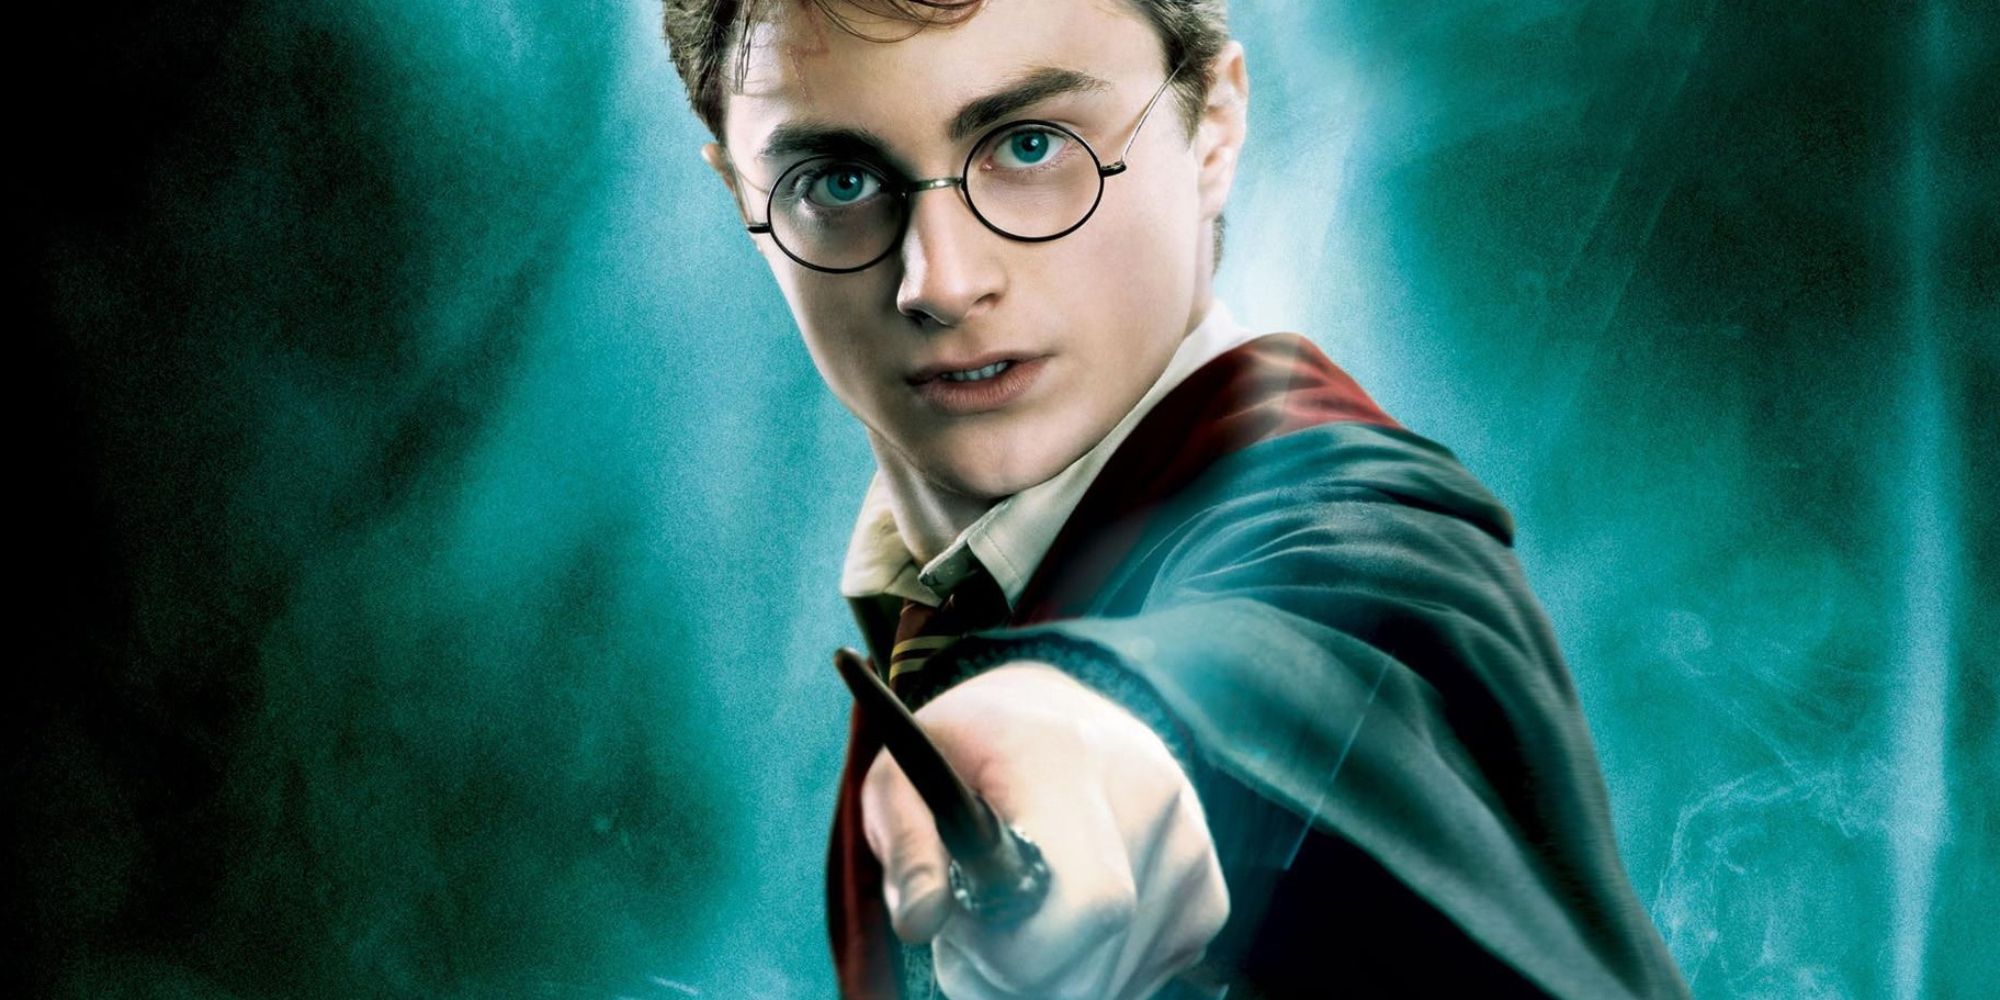 Daniel Radcliffe in 'Harry Potter', holding out a wand